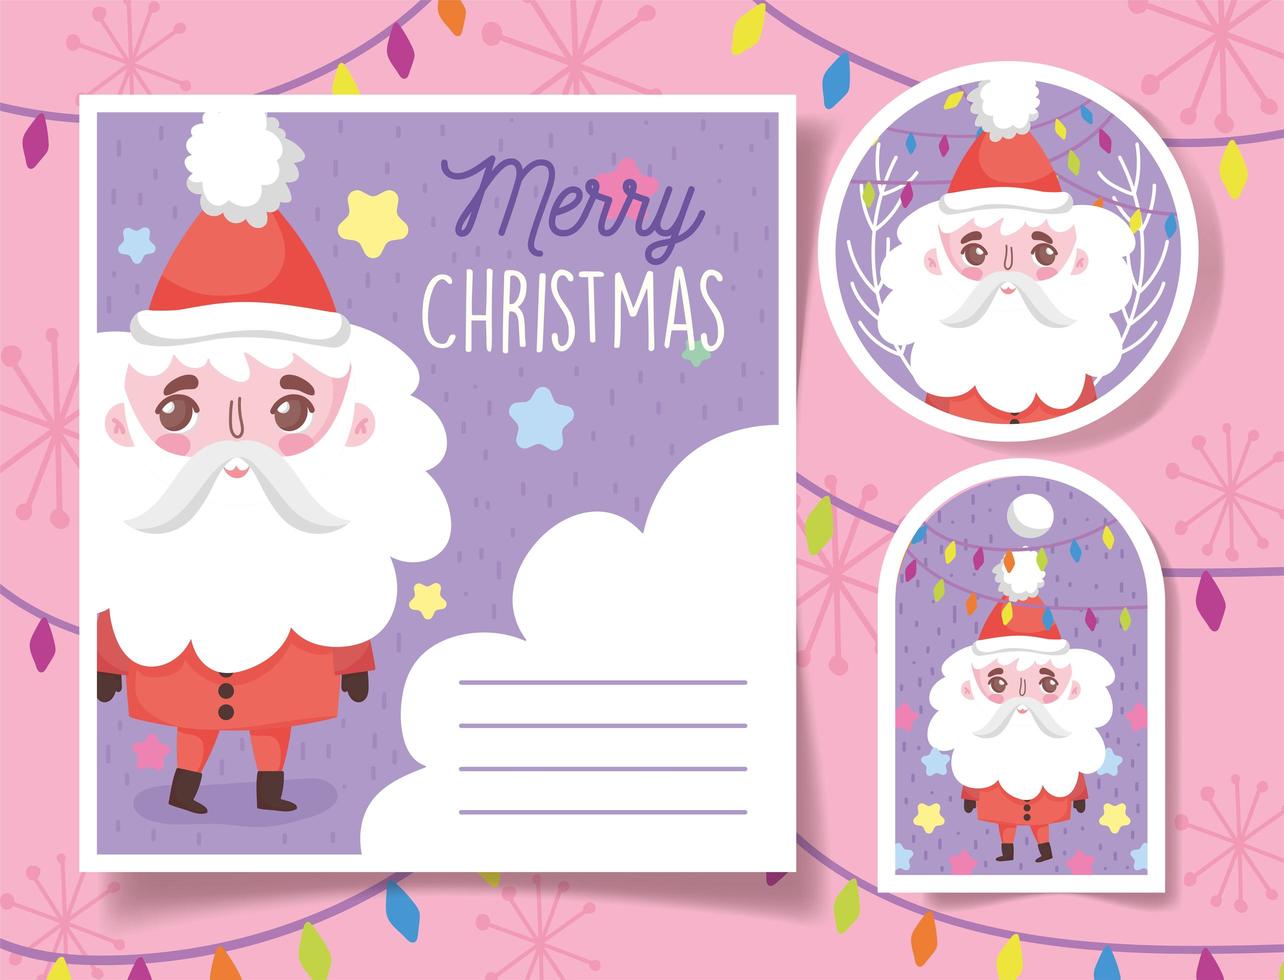 Cute Christmas tags with happy Santa Claus vector